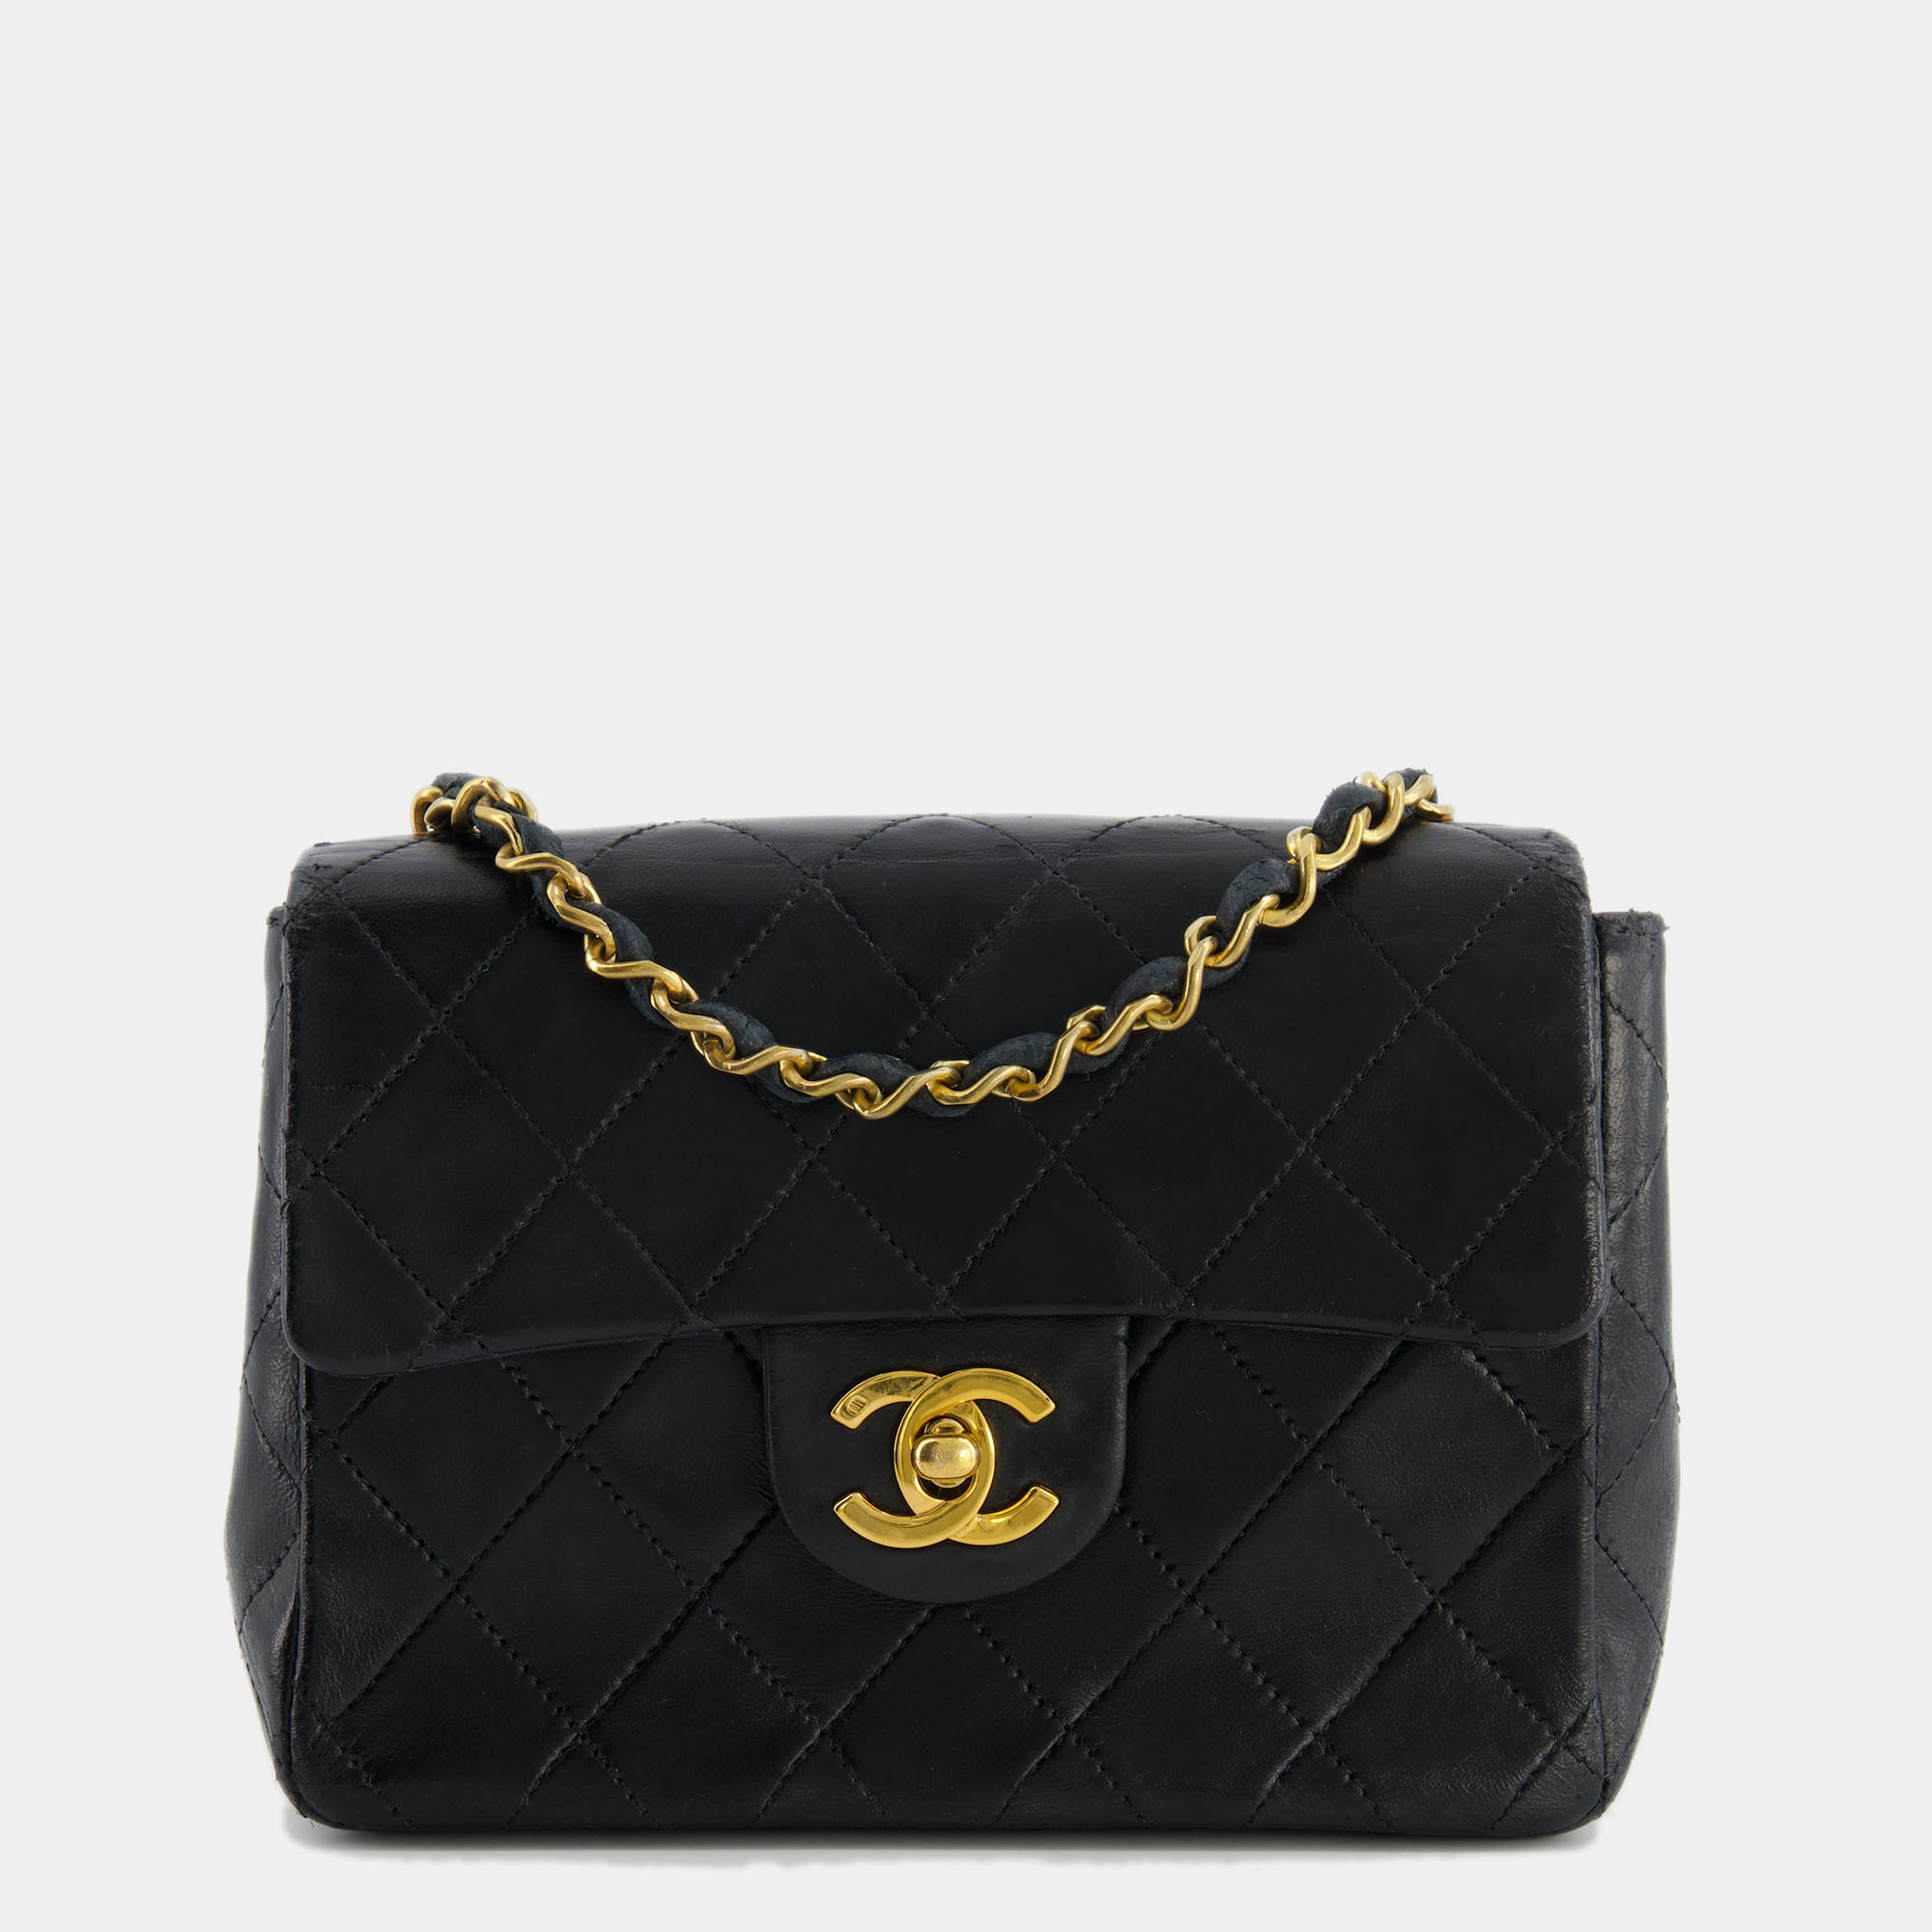 Chanel vintage black mini square bag in lambskin leather with 24k gold hardware